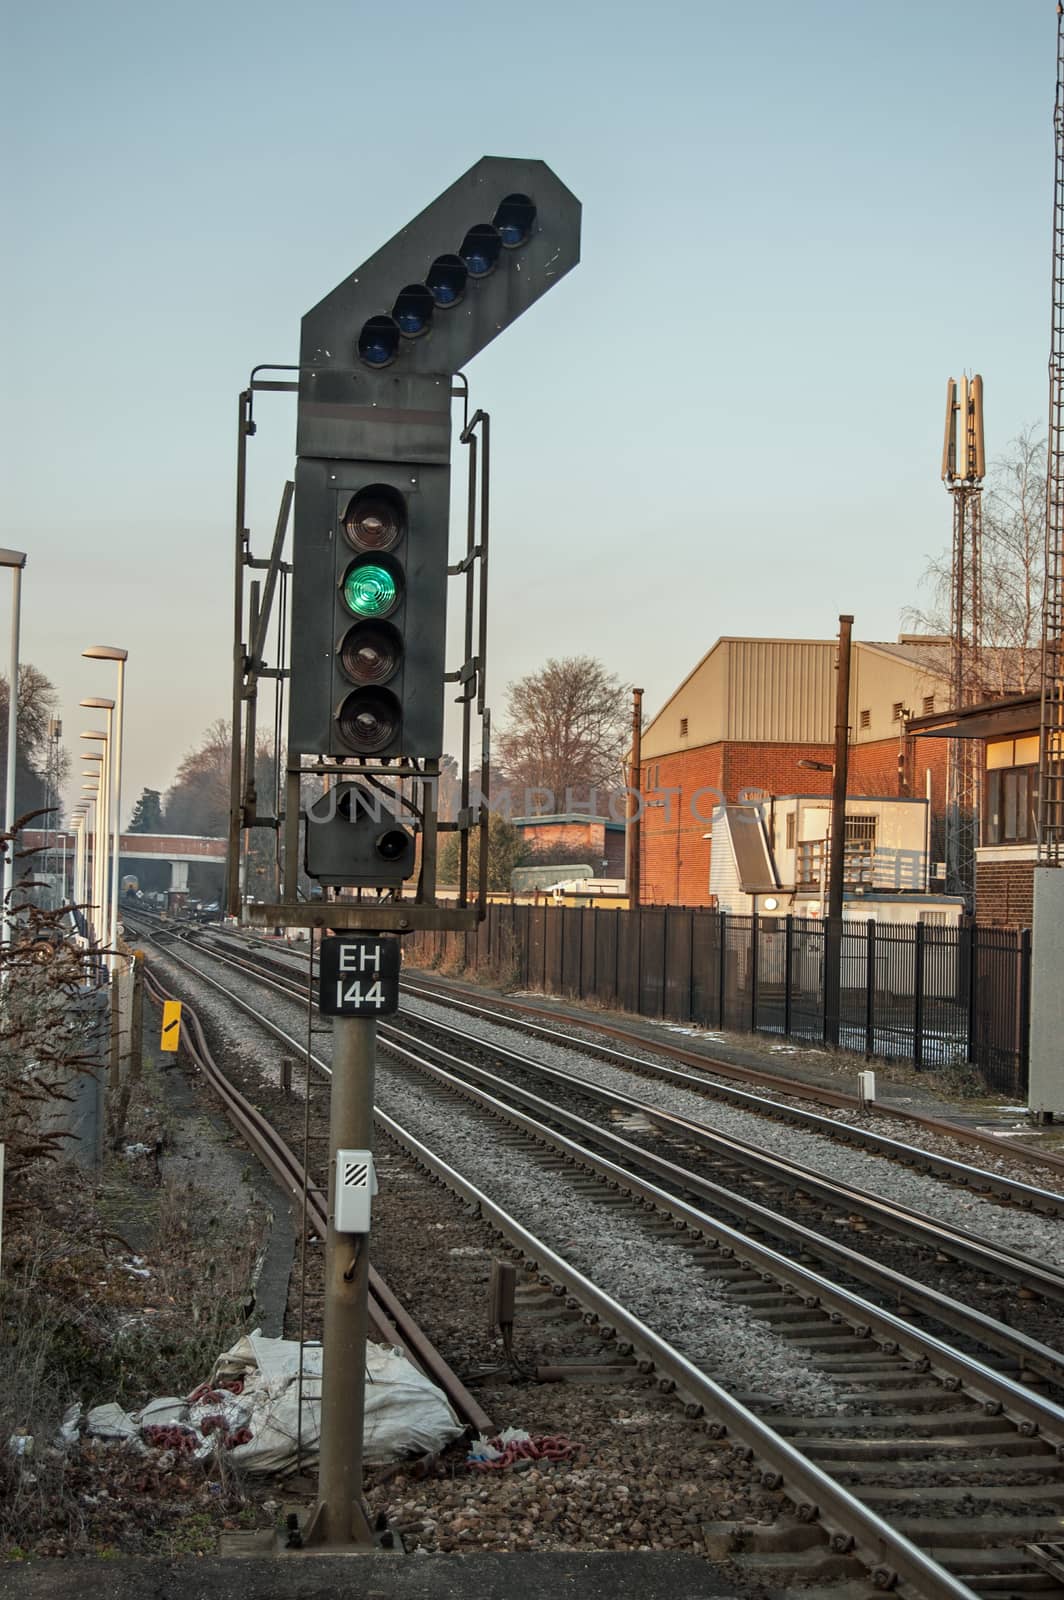 Green or Clear signal on a railway line in Hampshire by BasPhoto